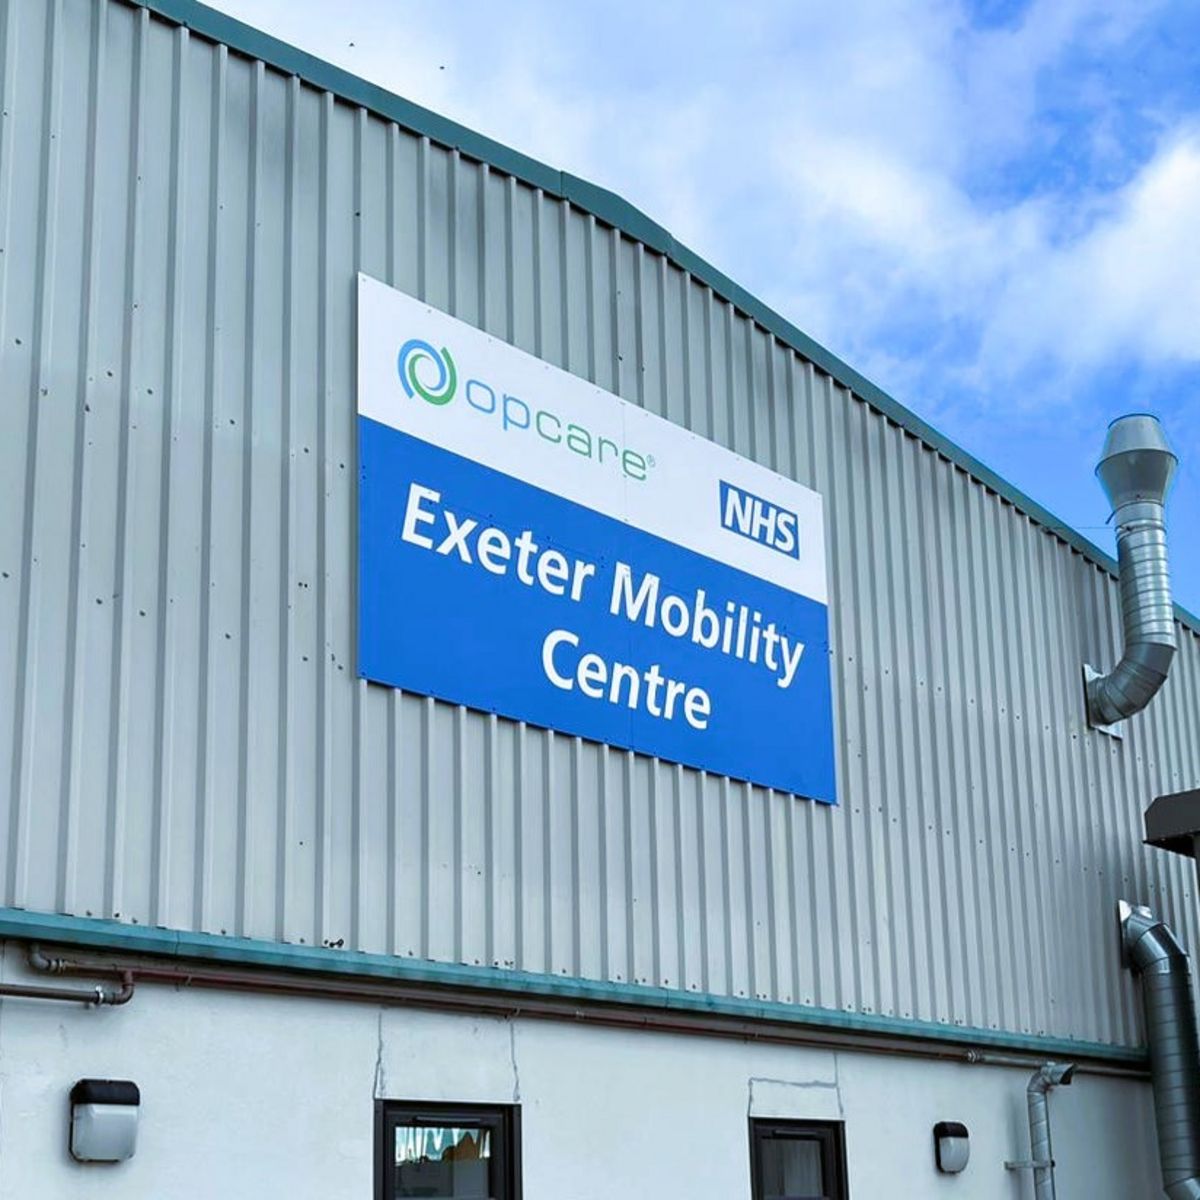 Large Printed Aluminium Sign Panel for Exeter Mobility Centre Mounted on External Building Wall. Size 3660 x 2000mm Landscape..jpg